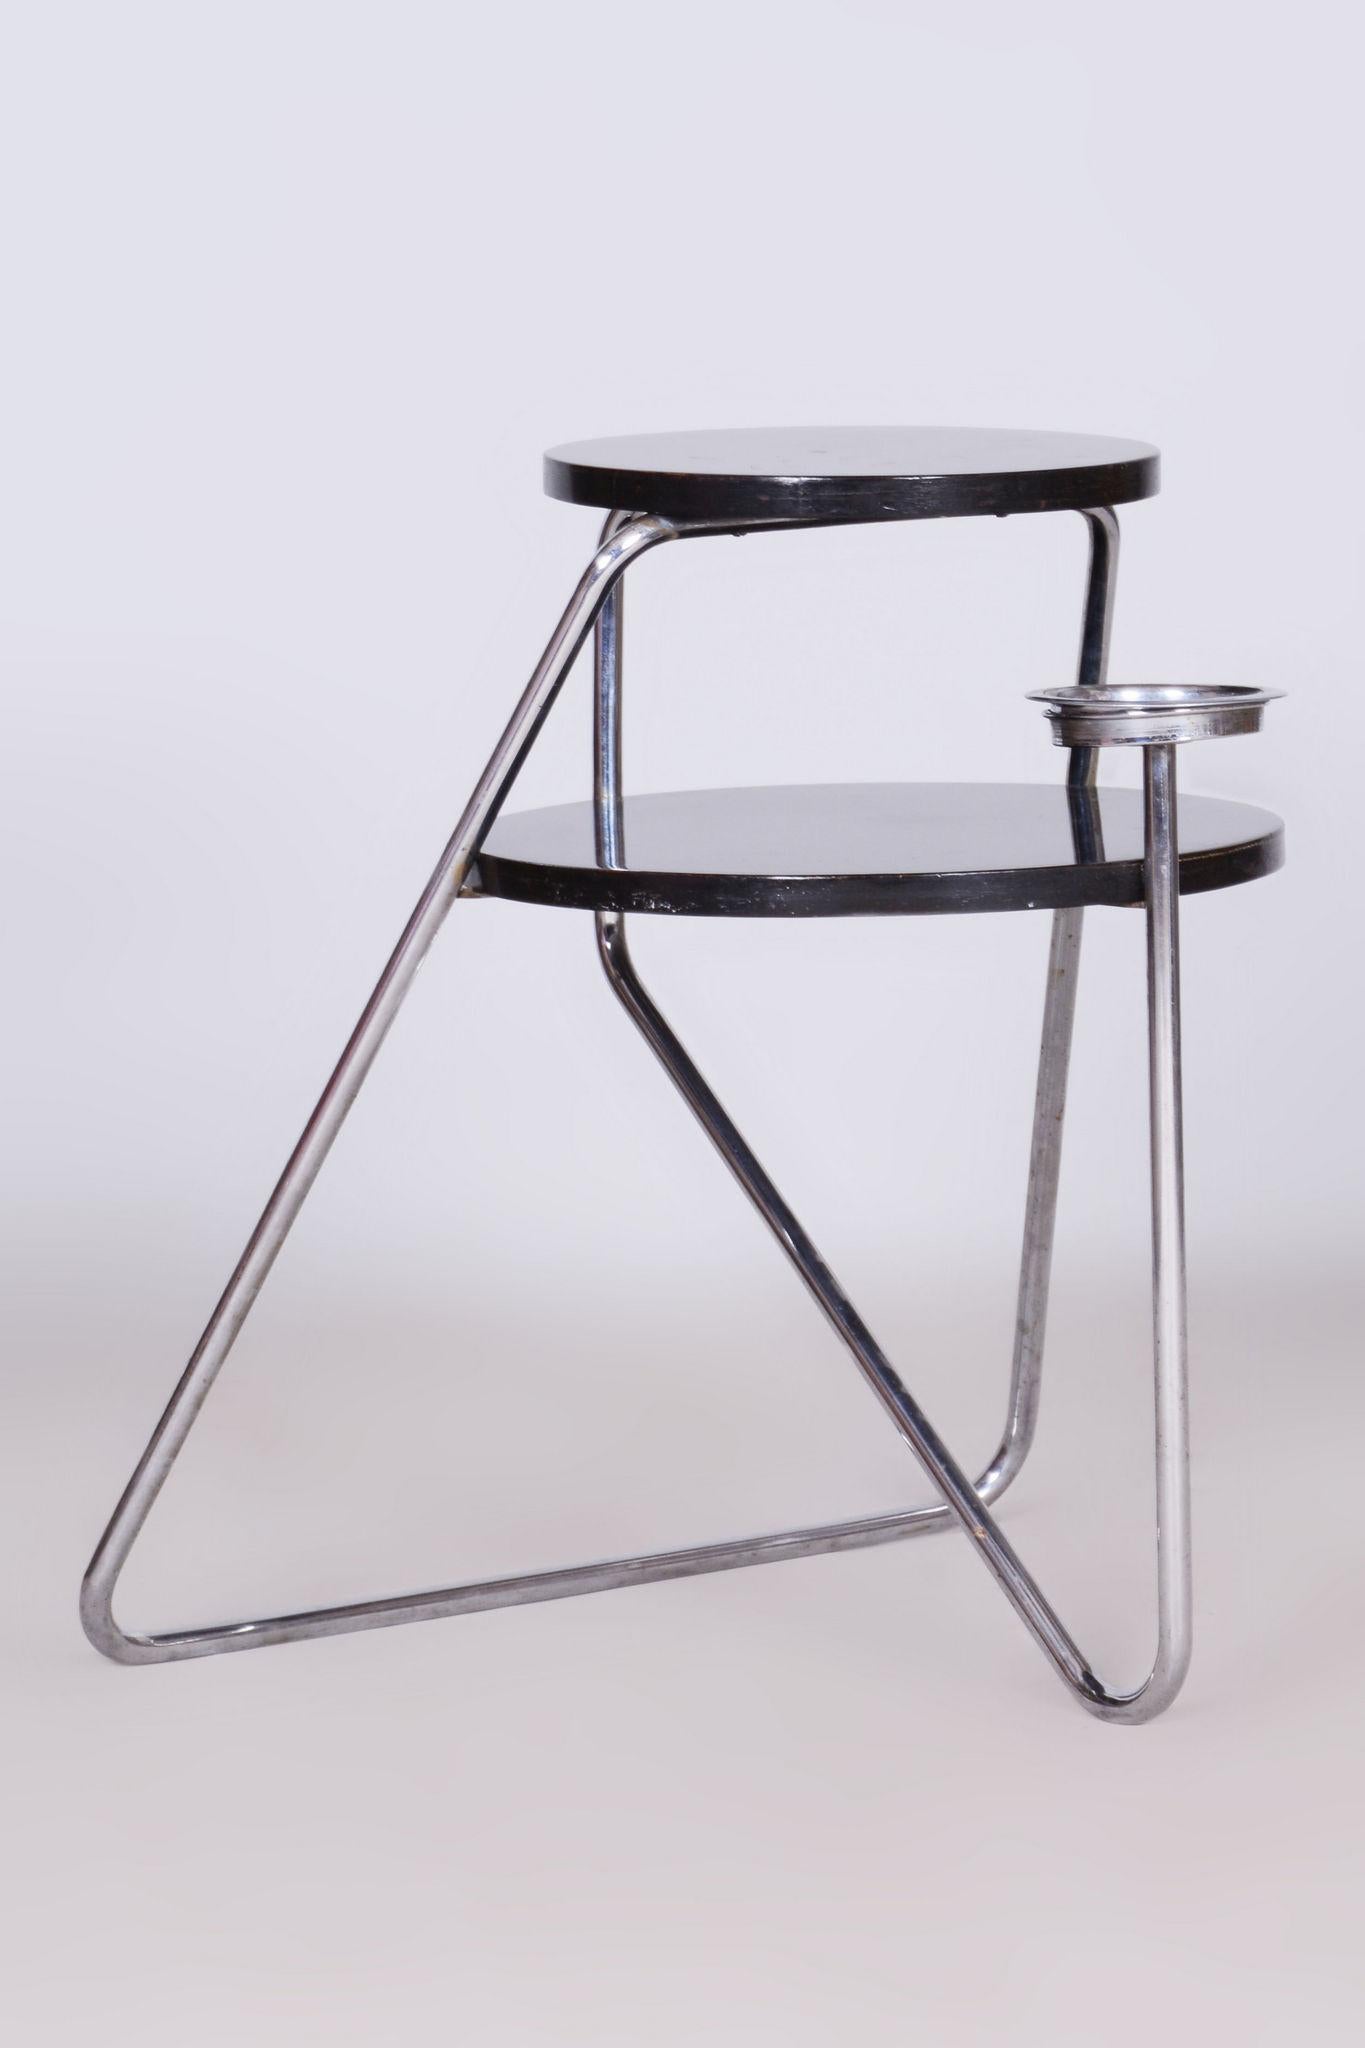 Restored Bauhaus Small Table. Revived Polish.

Material: Chrome-plated Steel, Blackened Batten
Source: Czechia 
Period: 1930-1939

For its time, this table has a very unusual avant-garde modernist design.

The chrome parts have been cleaned and